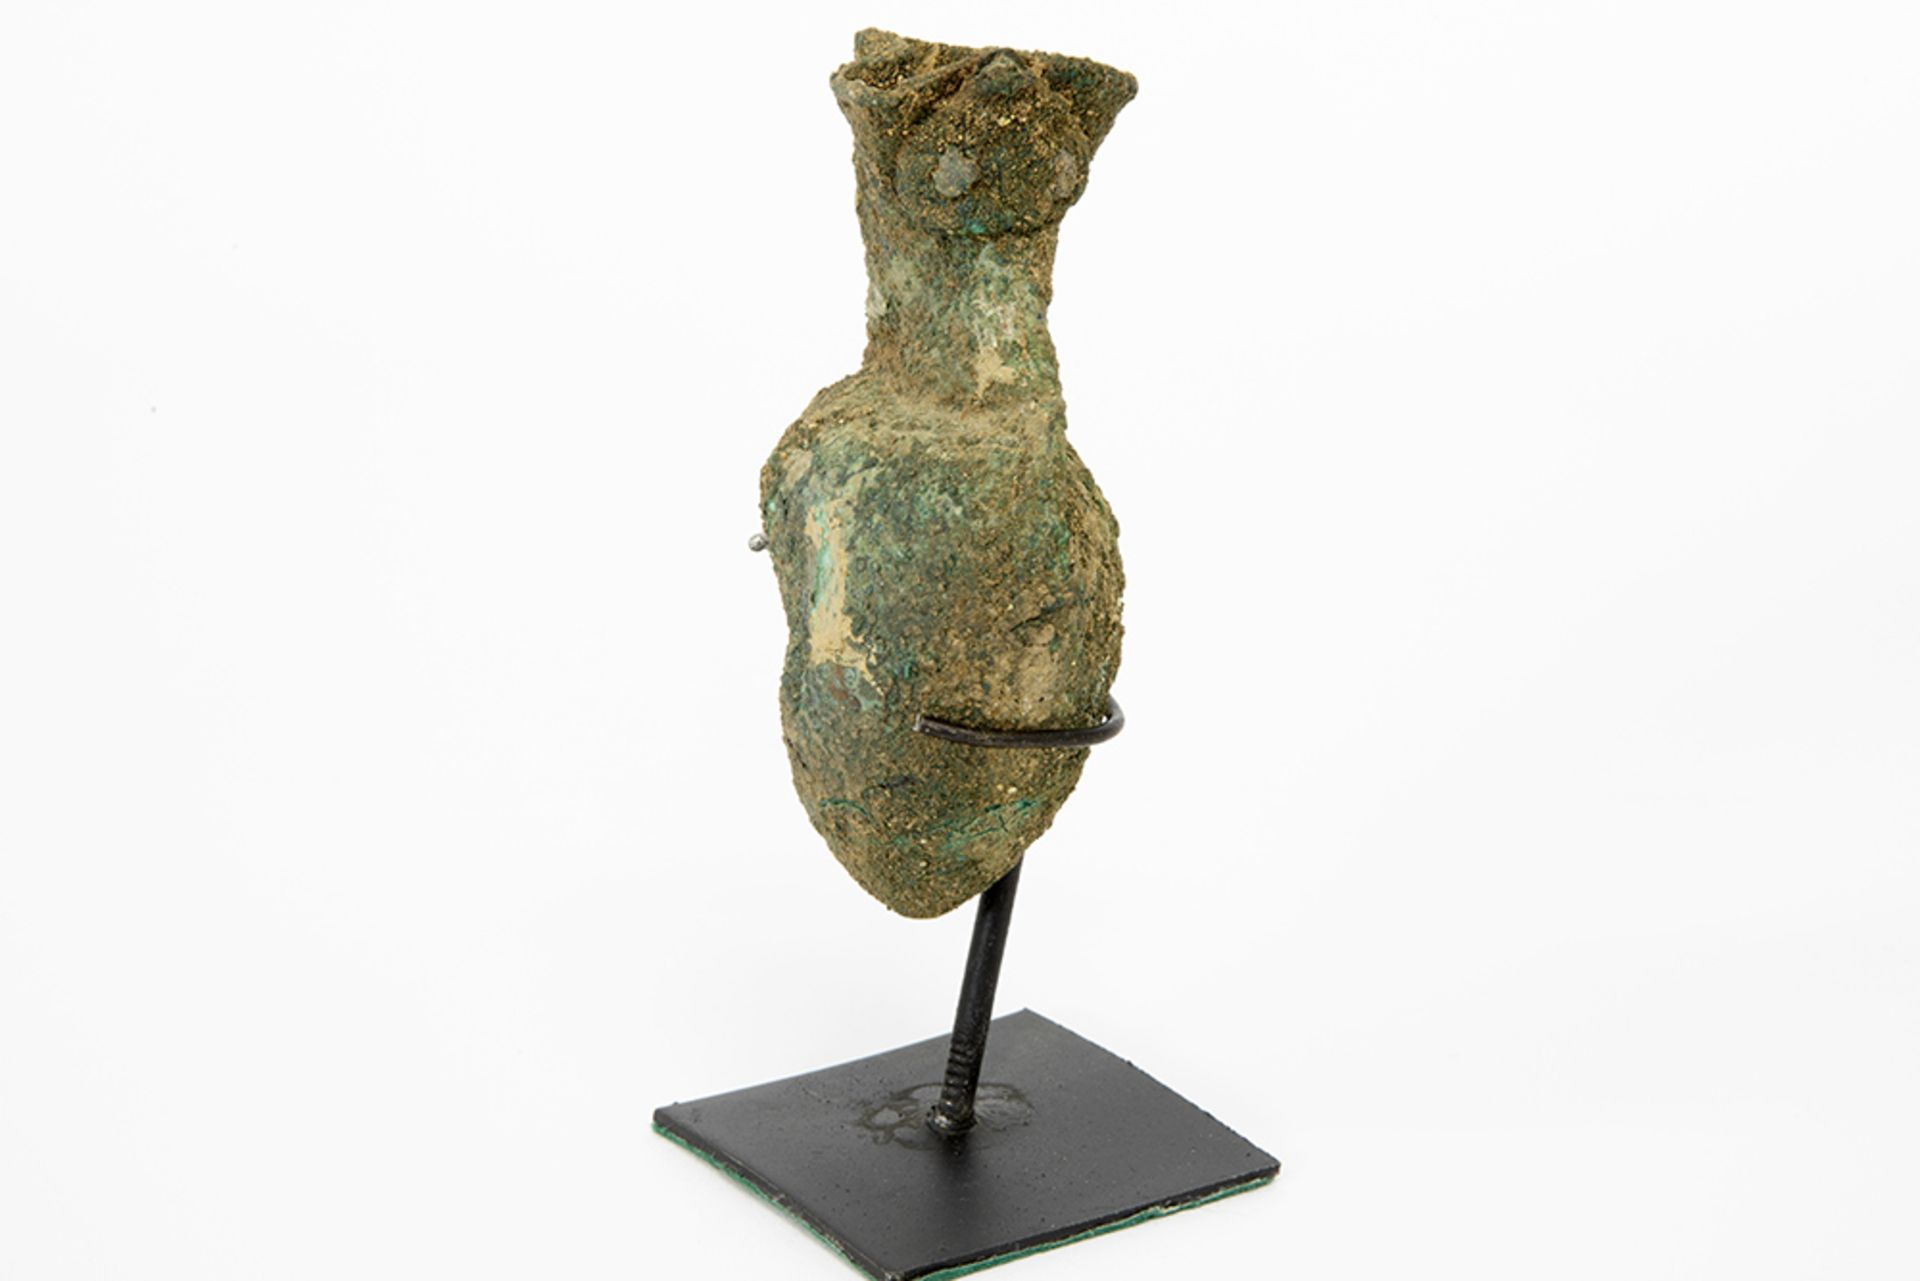 small 1st/3rd Cent. Ancient Rome vase in bronze || OUD-ROMEINSE RIJK - 1°/3° EEUW grafvondst : - Image 2 of 4